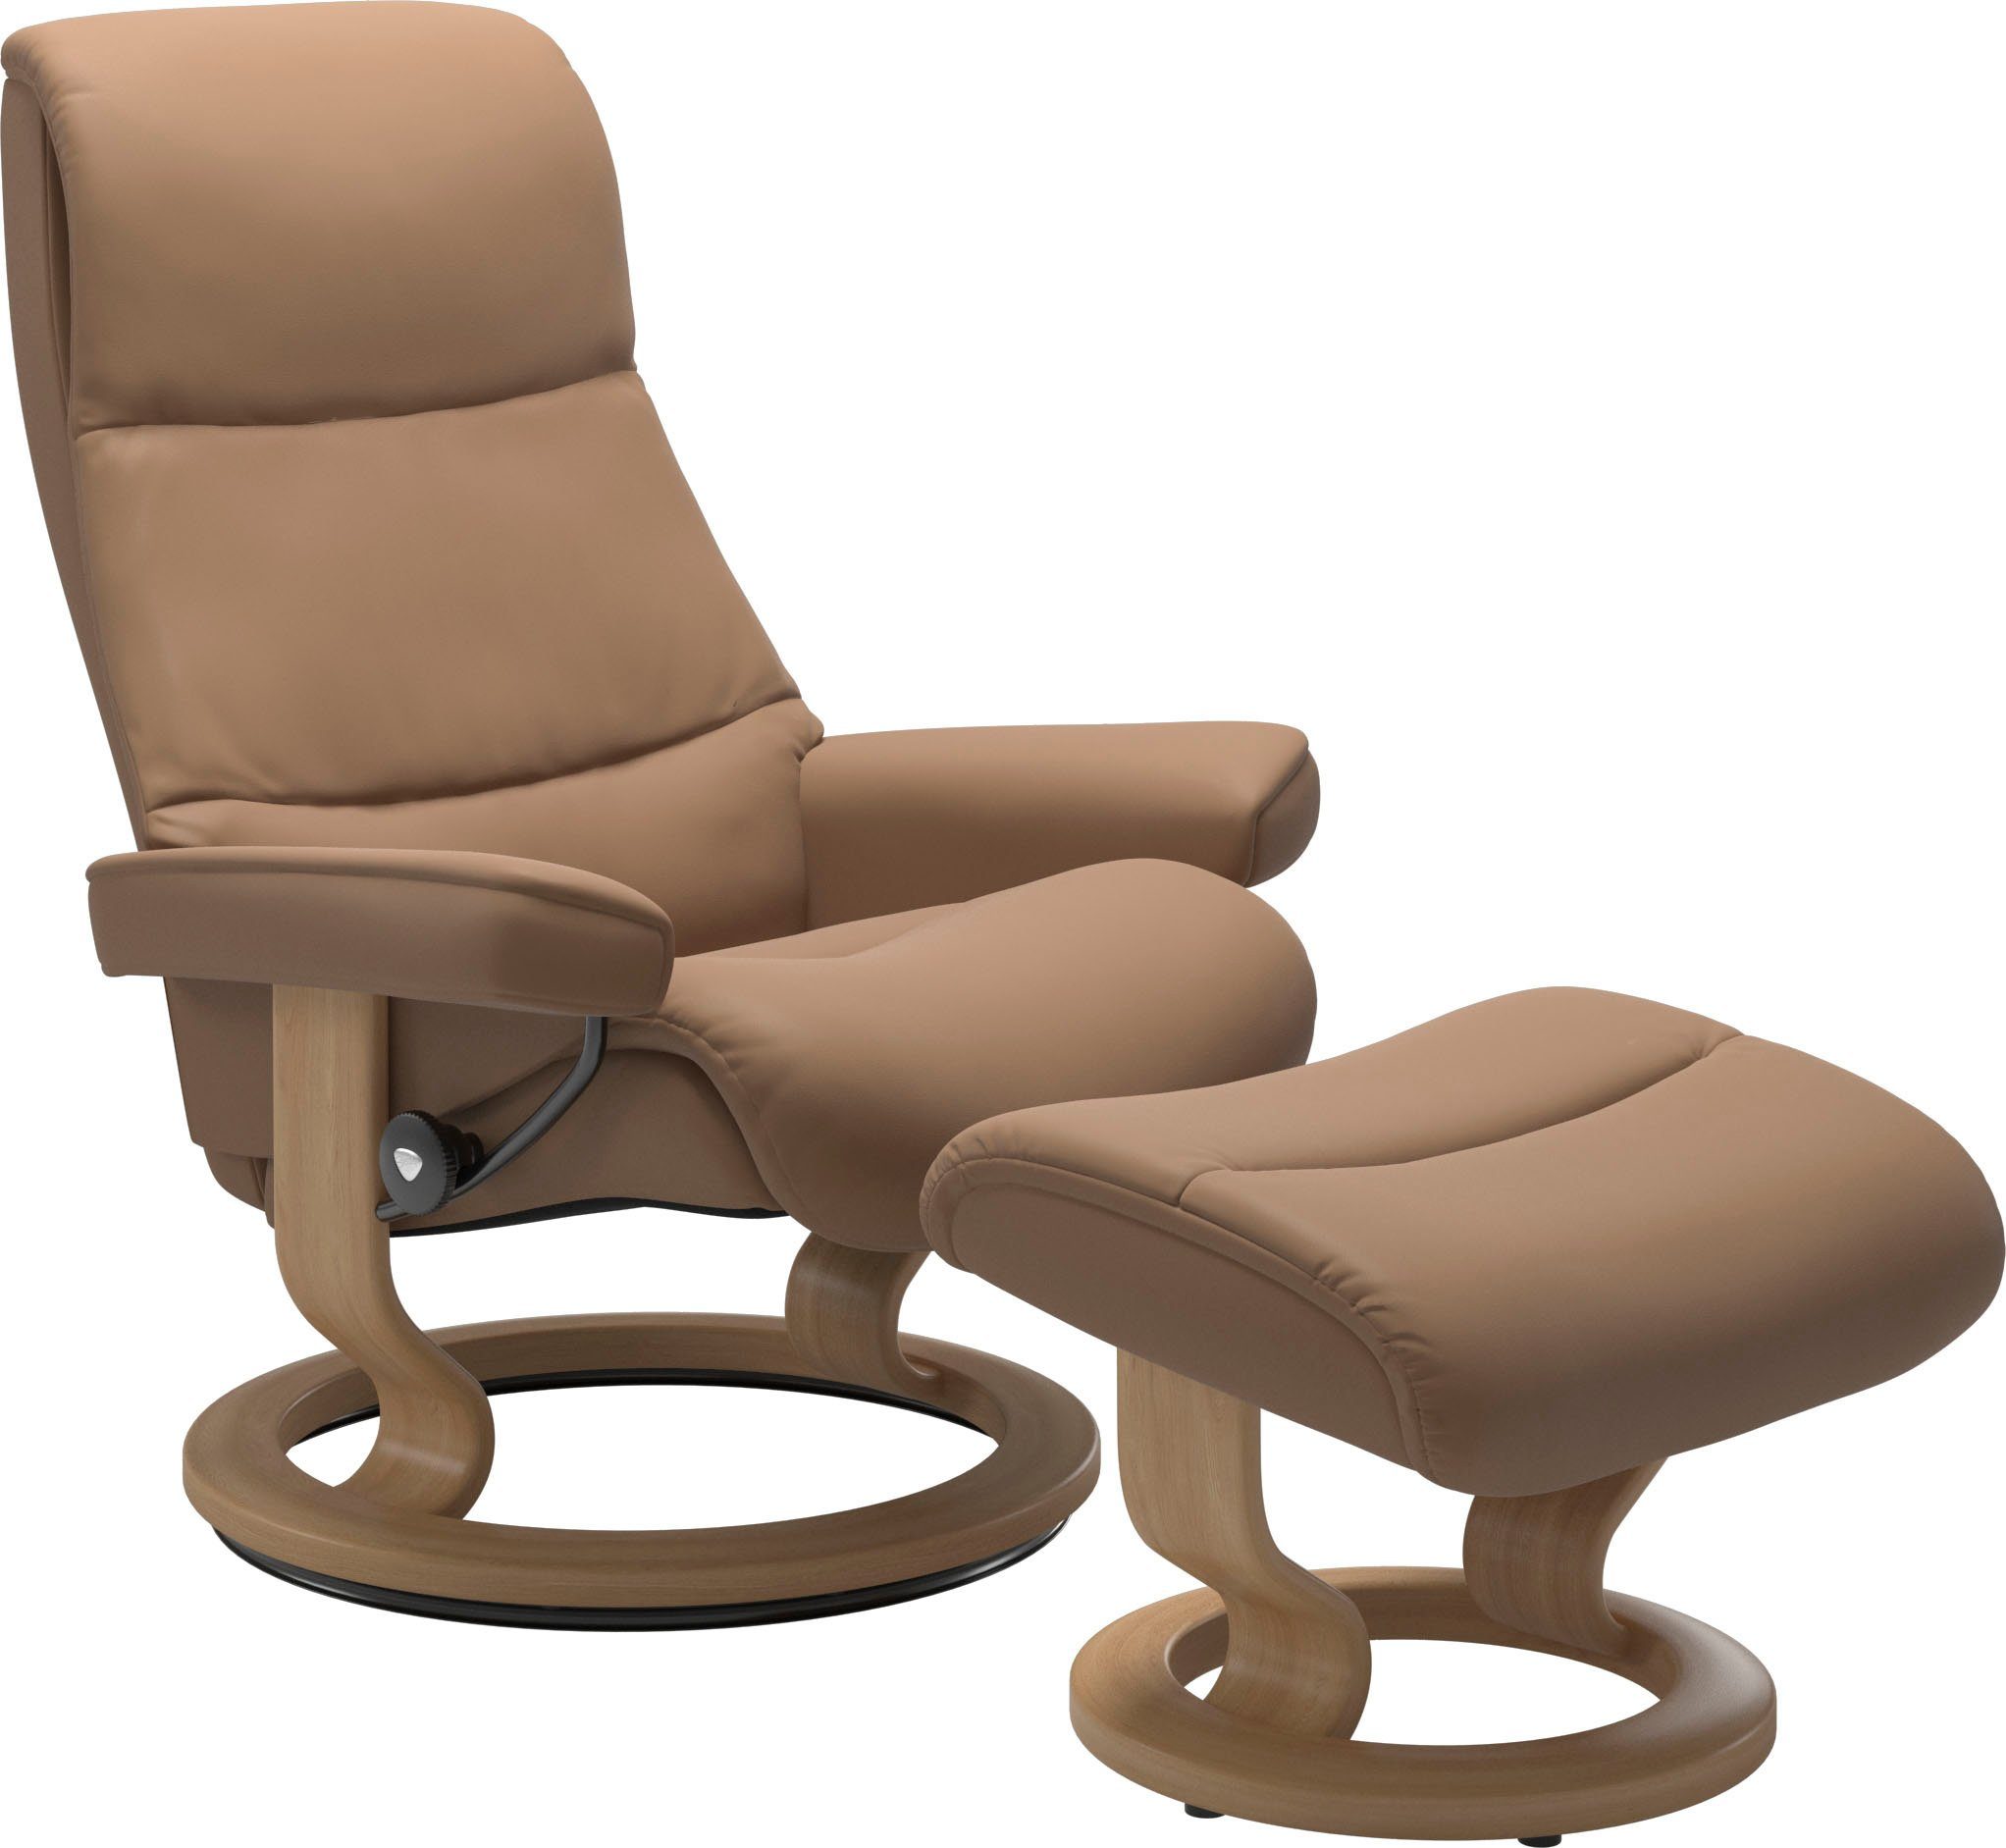 Stressless® Relaxsessel View, mit Classic Base, Größe S,Gestell Eiche | Funktionssessel